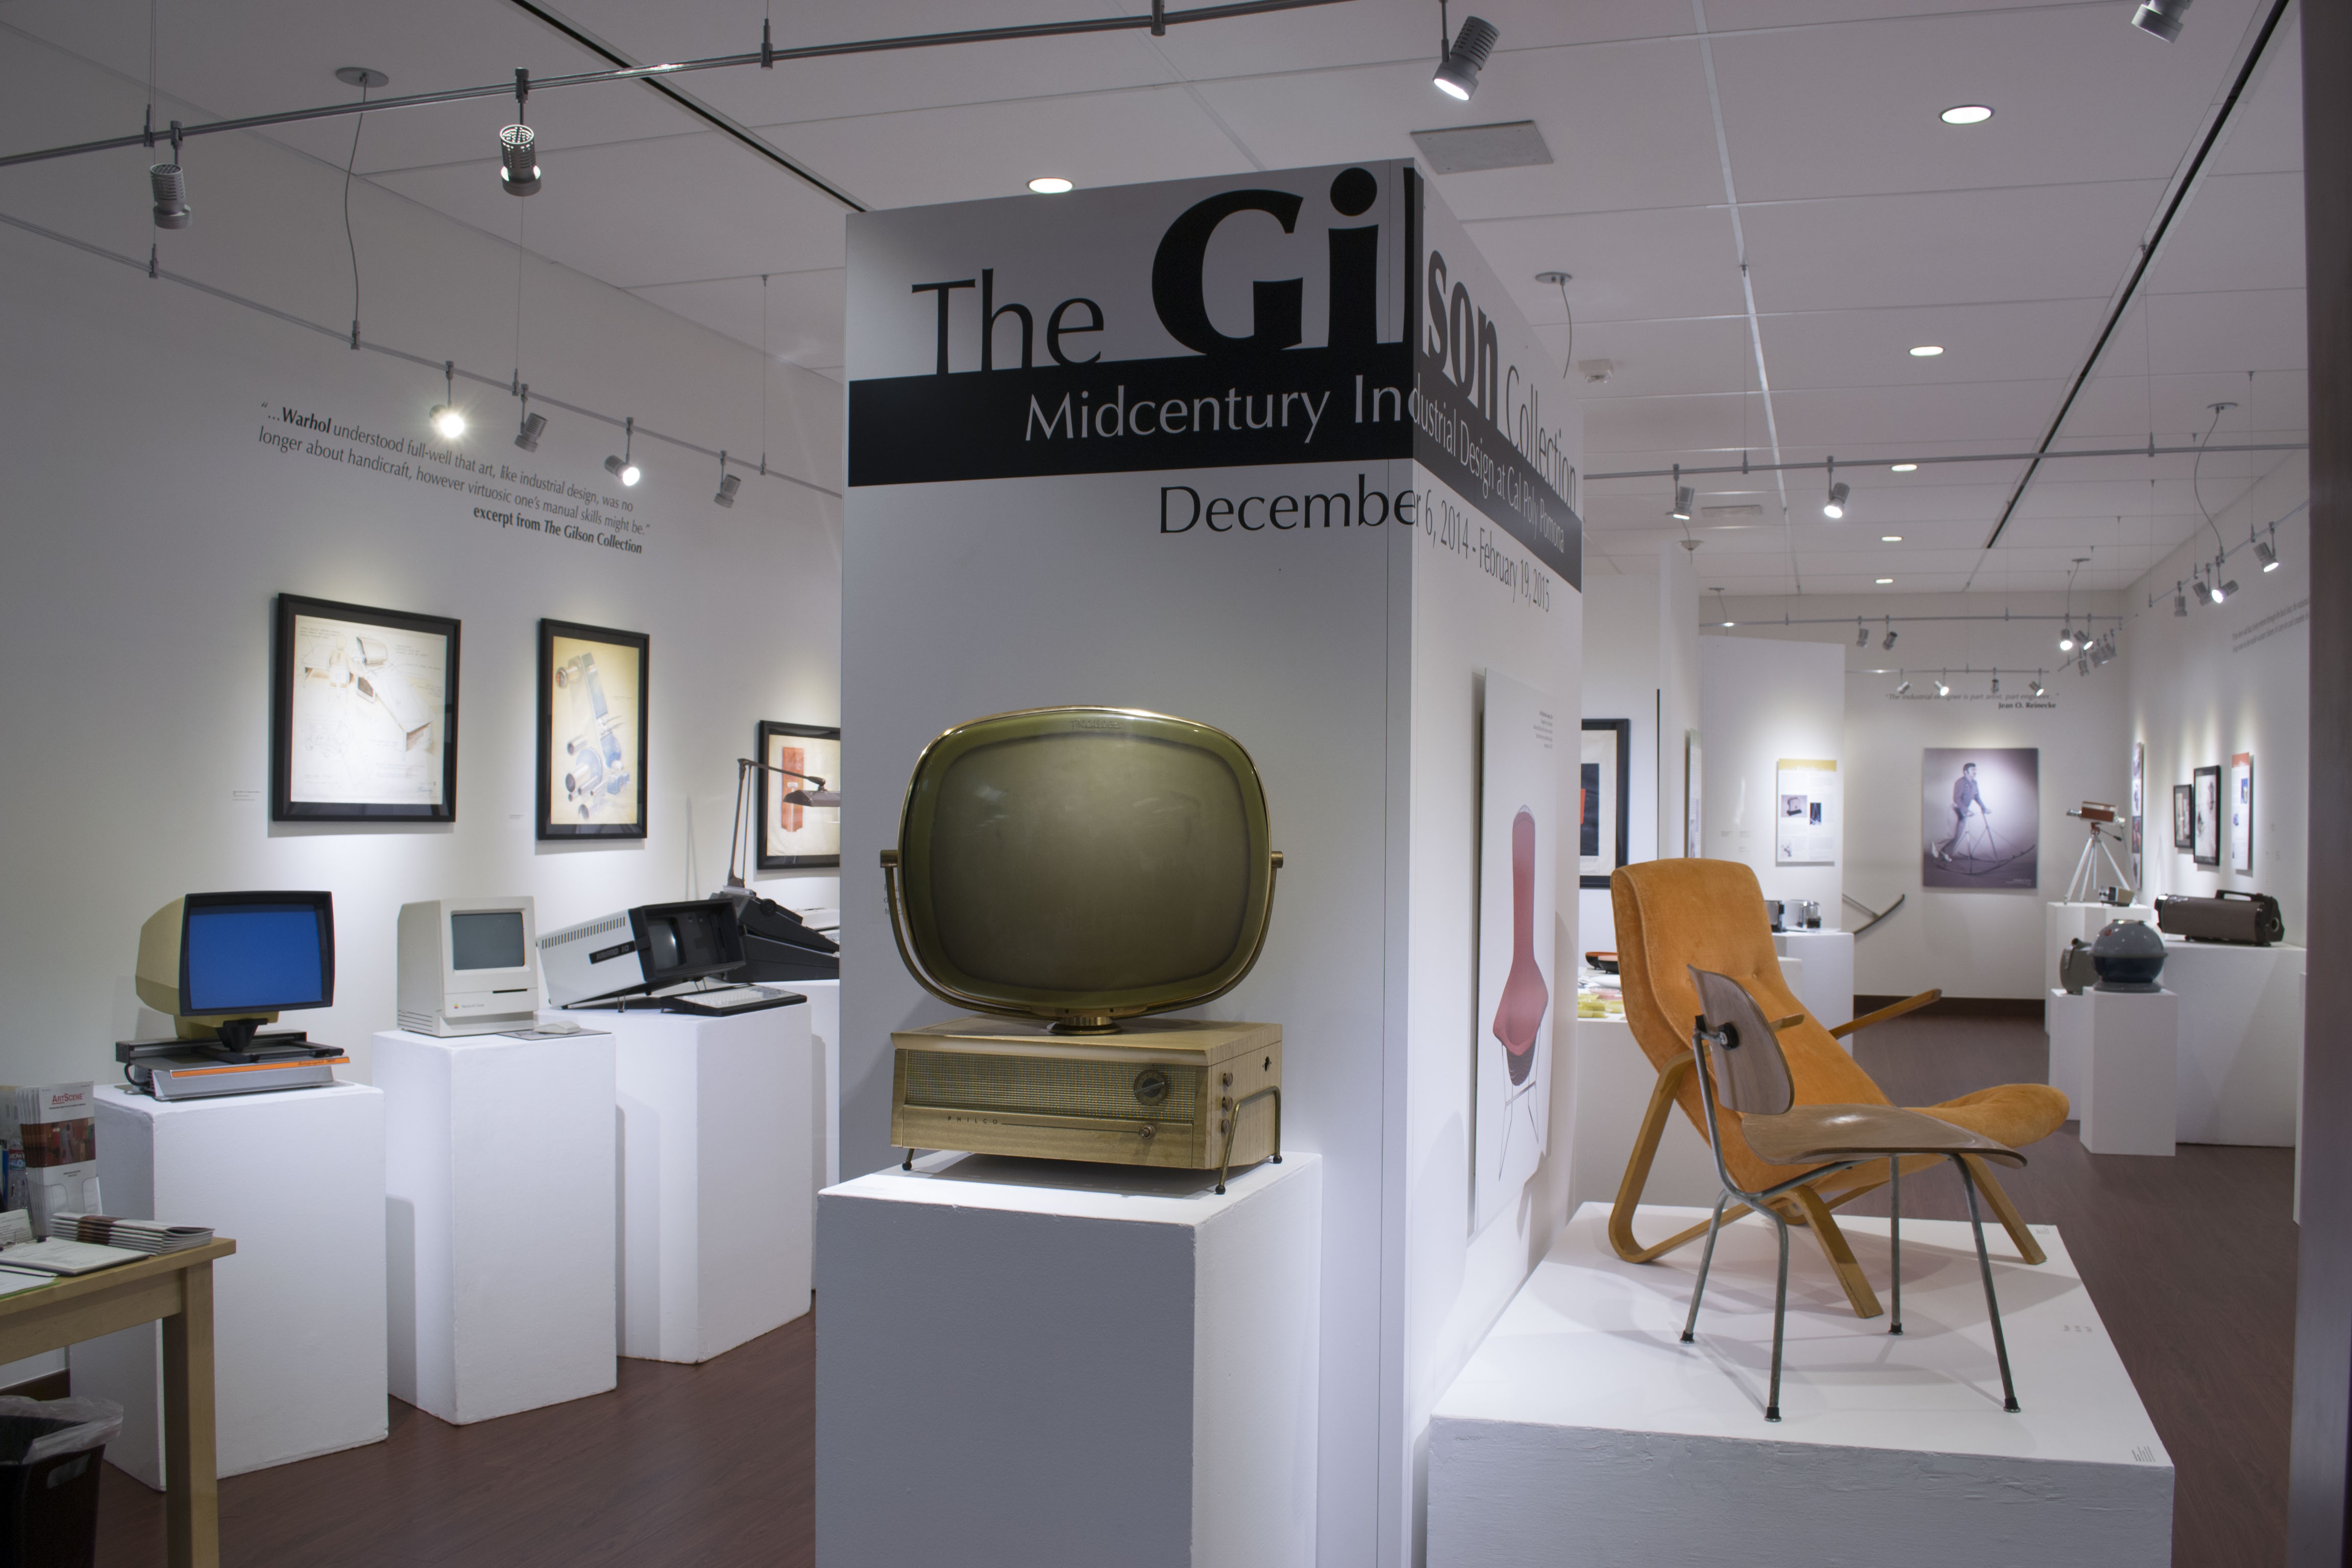 Installation View, Front of Gallery, The Gilson Collection: Midcentury Design at Cal Poly Pomona Exhibition, 2014.